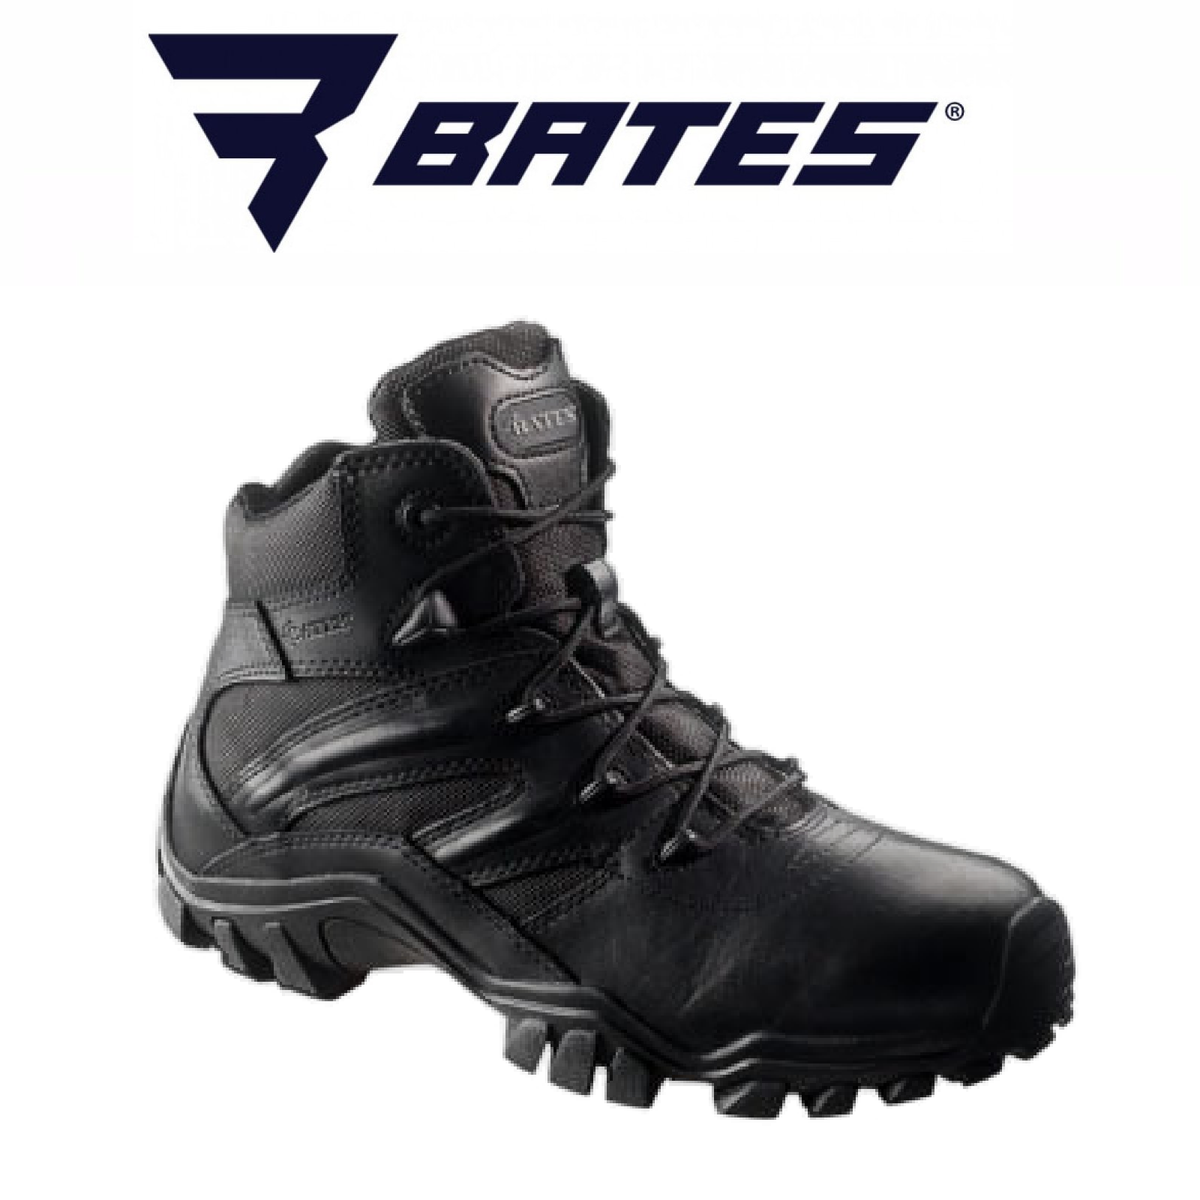 Bates Womens Delta 6 Side Zip Boots Soft Toe Durable Leather Work Safety E72013